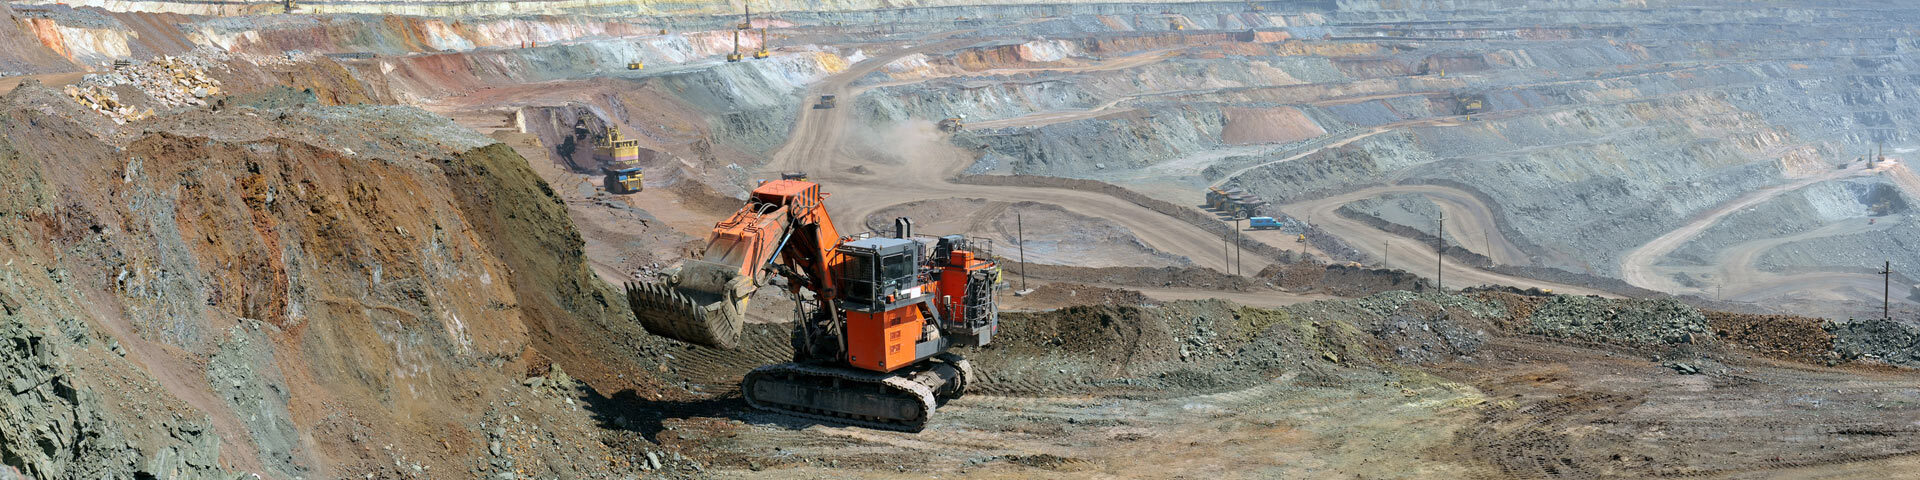 Mining Security Solutions - Electronic Security Concepts